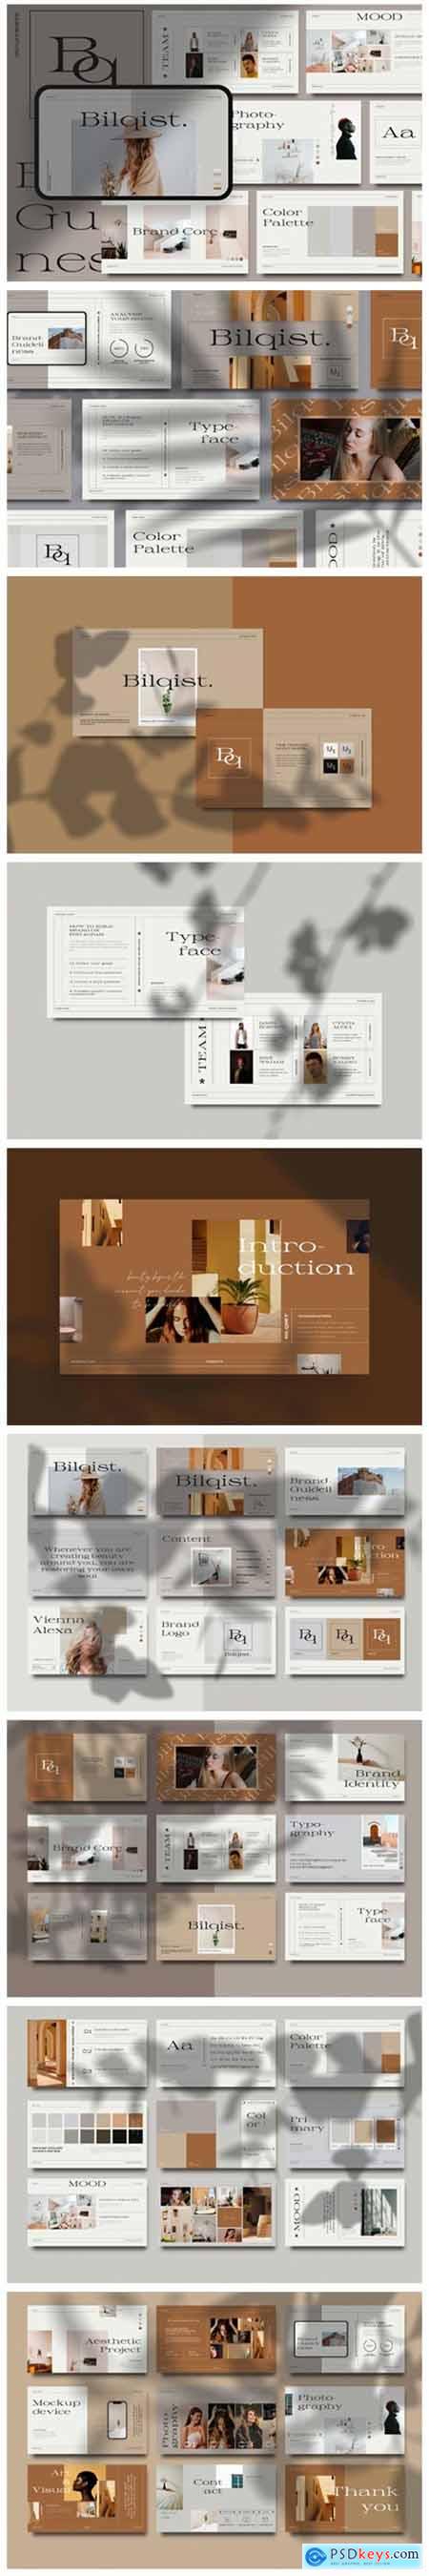 Bilqist - Aesthetic Brand Guidelines Template 6717662